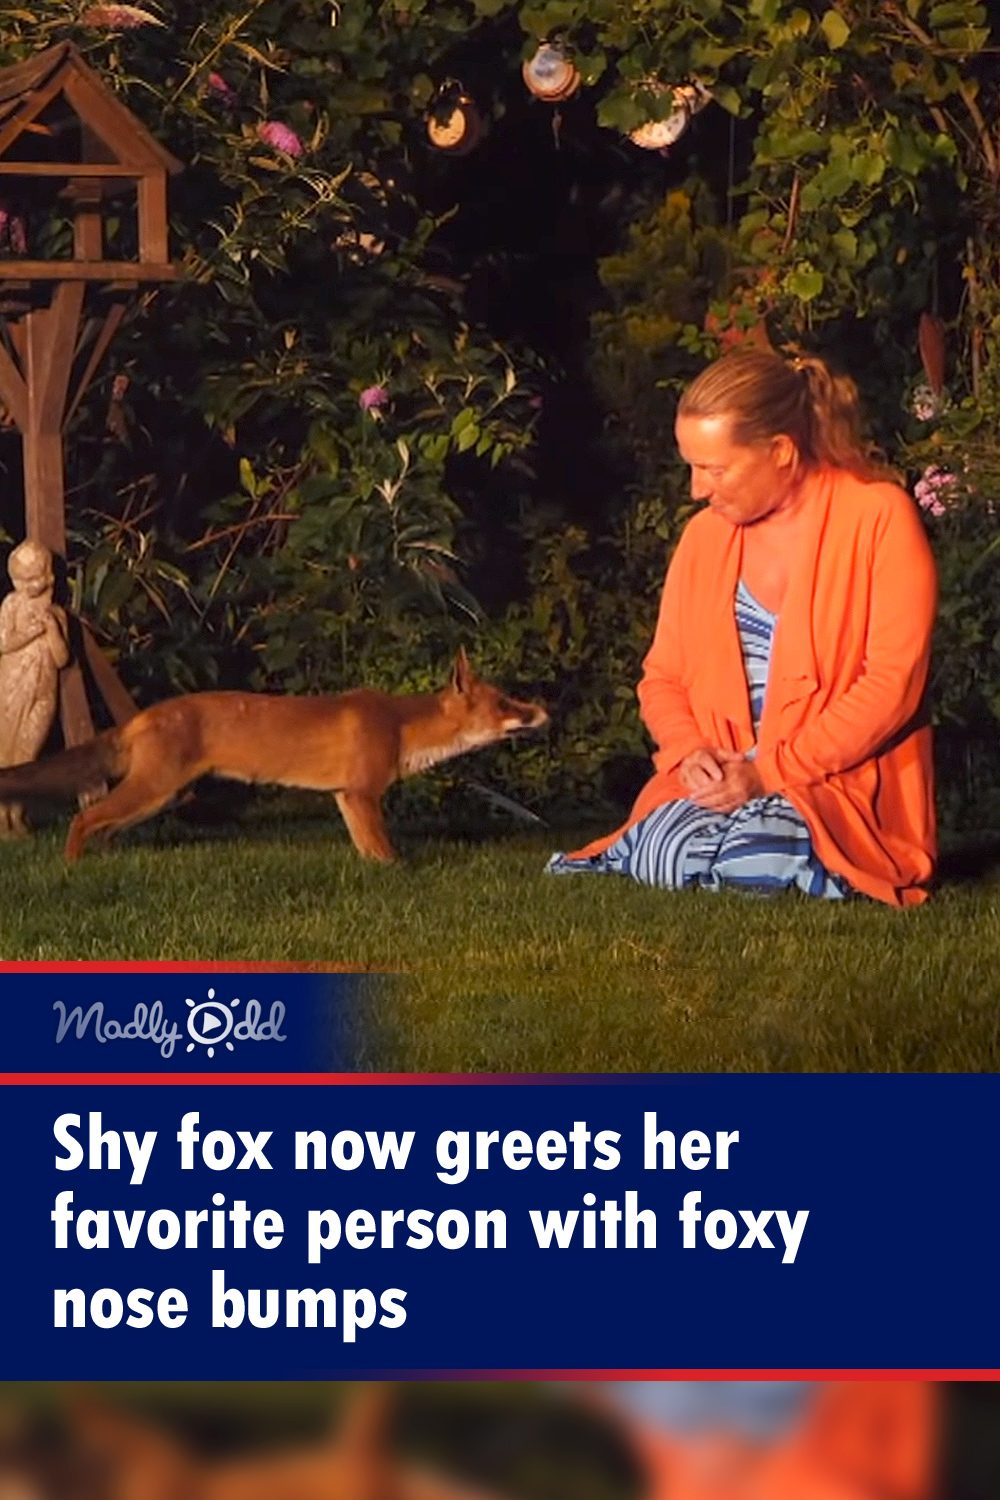 Shy fox now greets her favorite person with foxy nose bumps